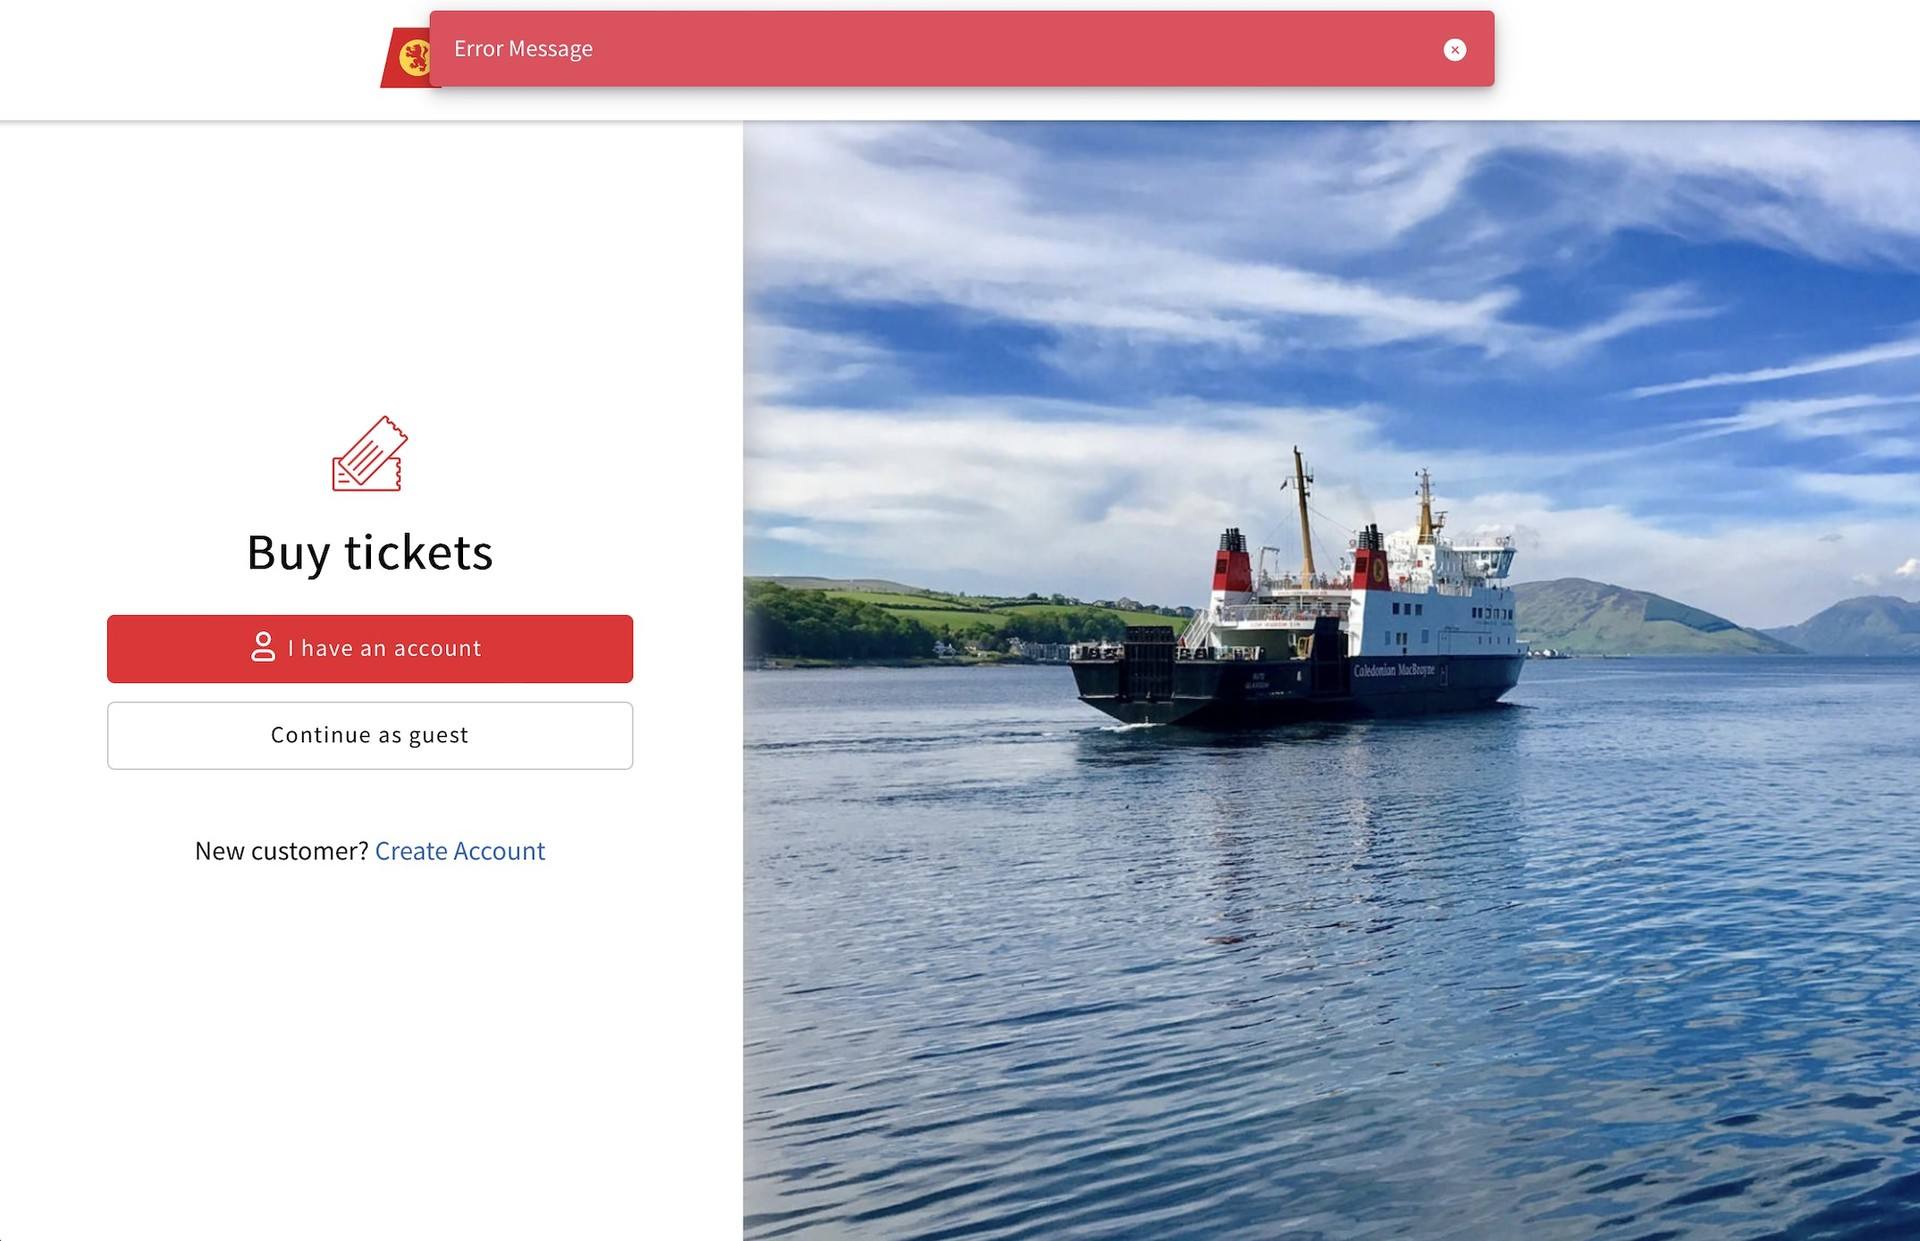 CalMac's long-awaited new ticketing system was plagued by issues when it launched.